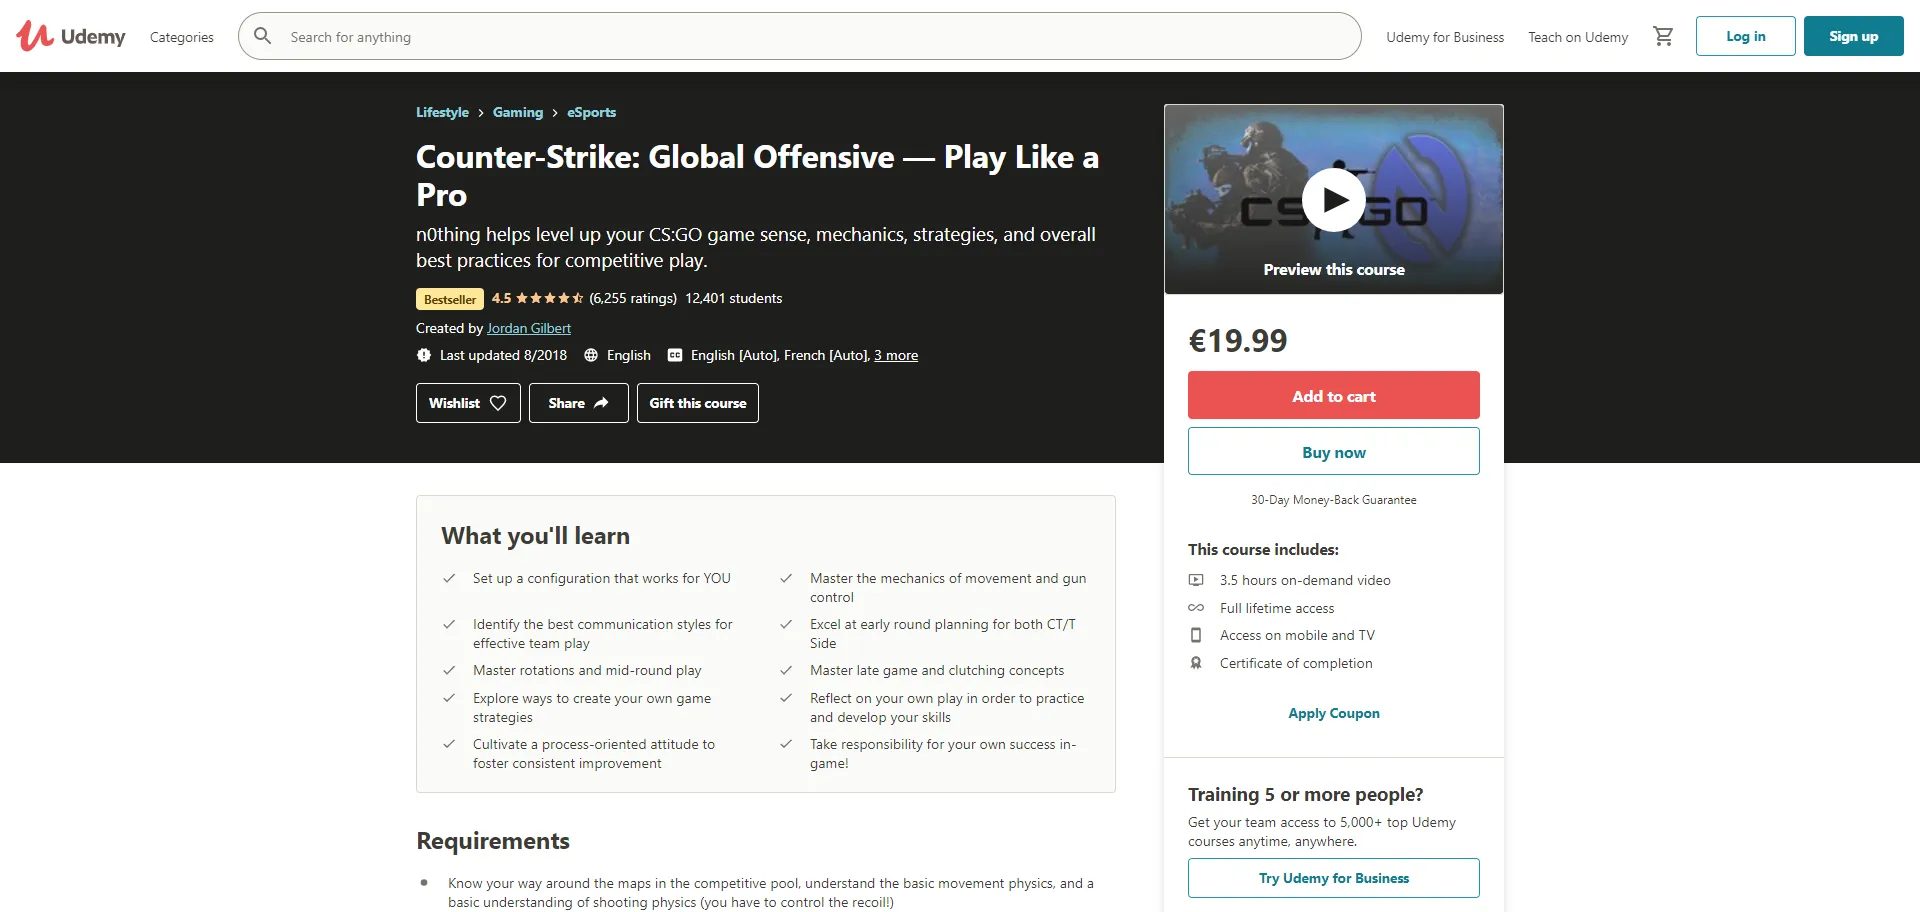 n0thing Udemy CSGO Course